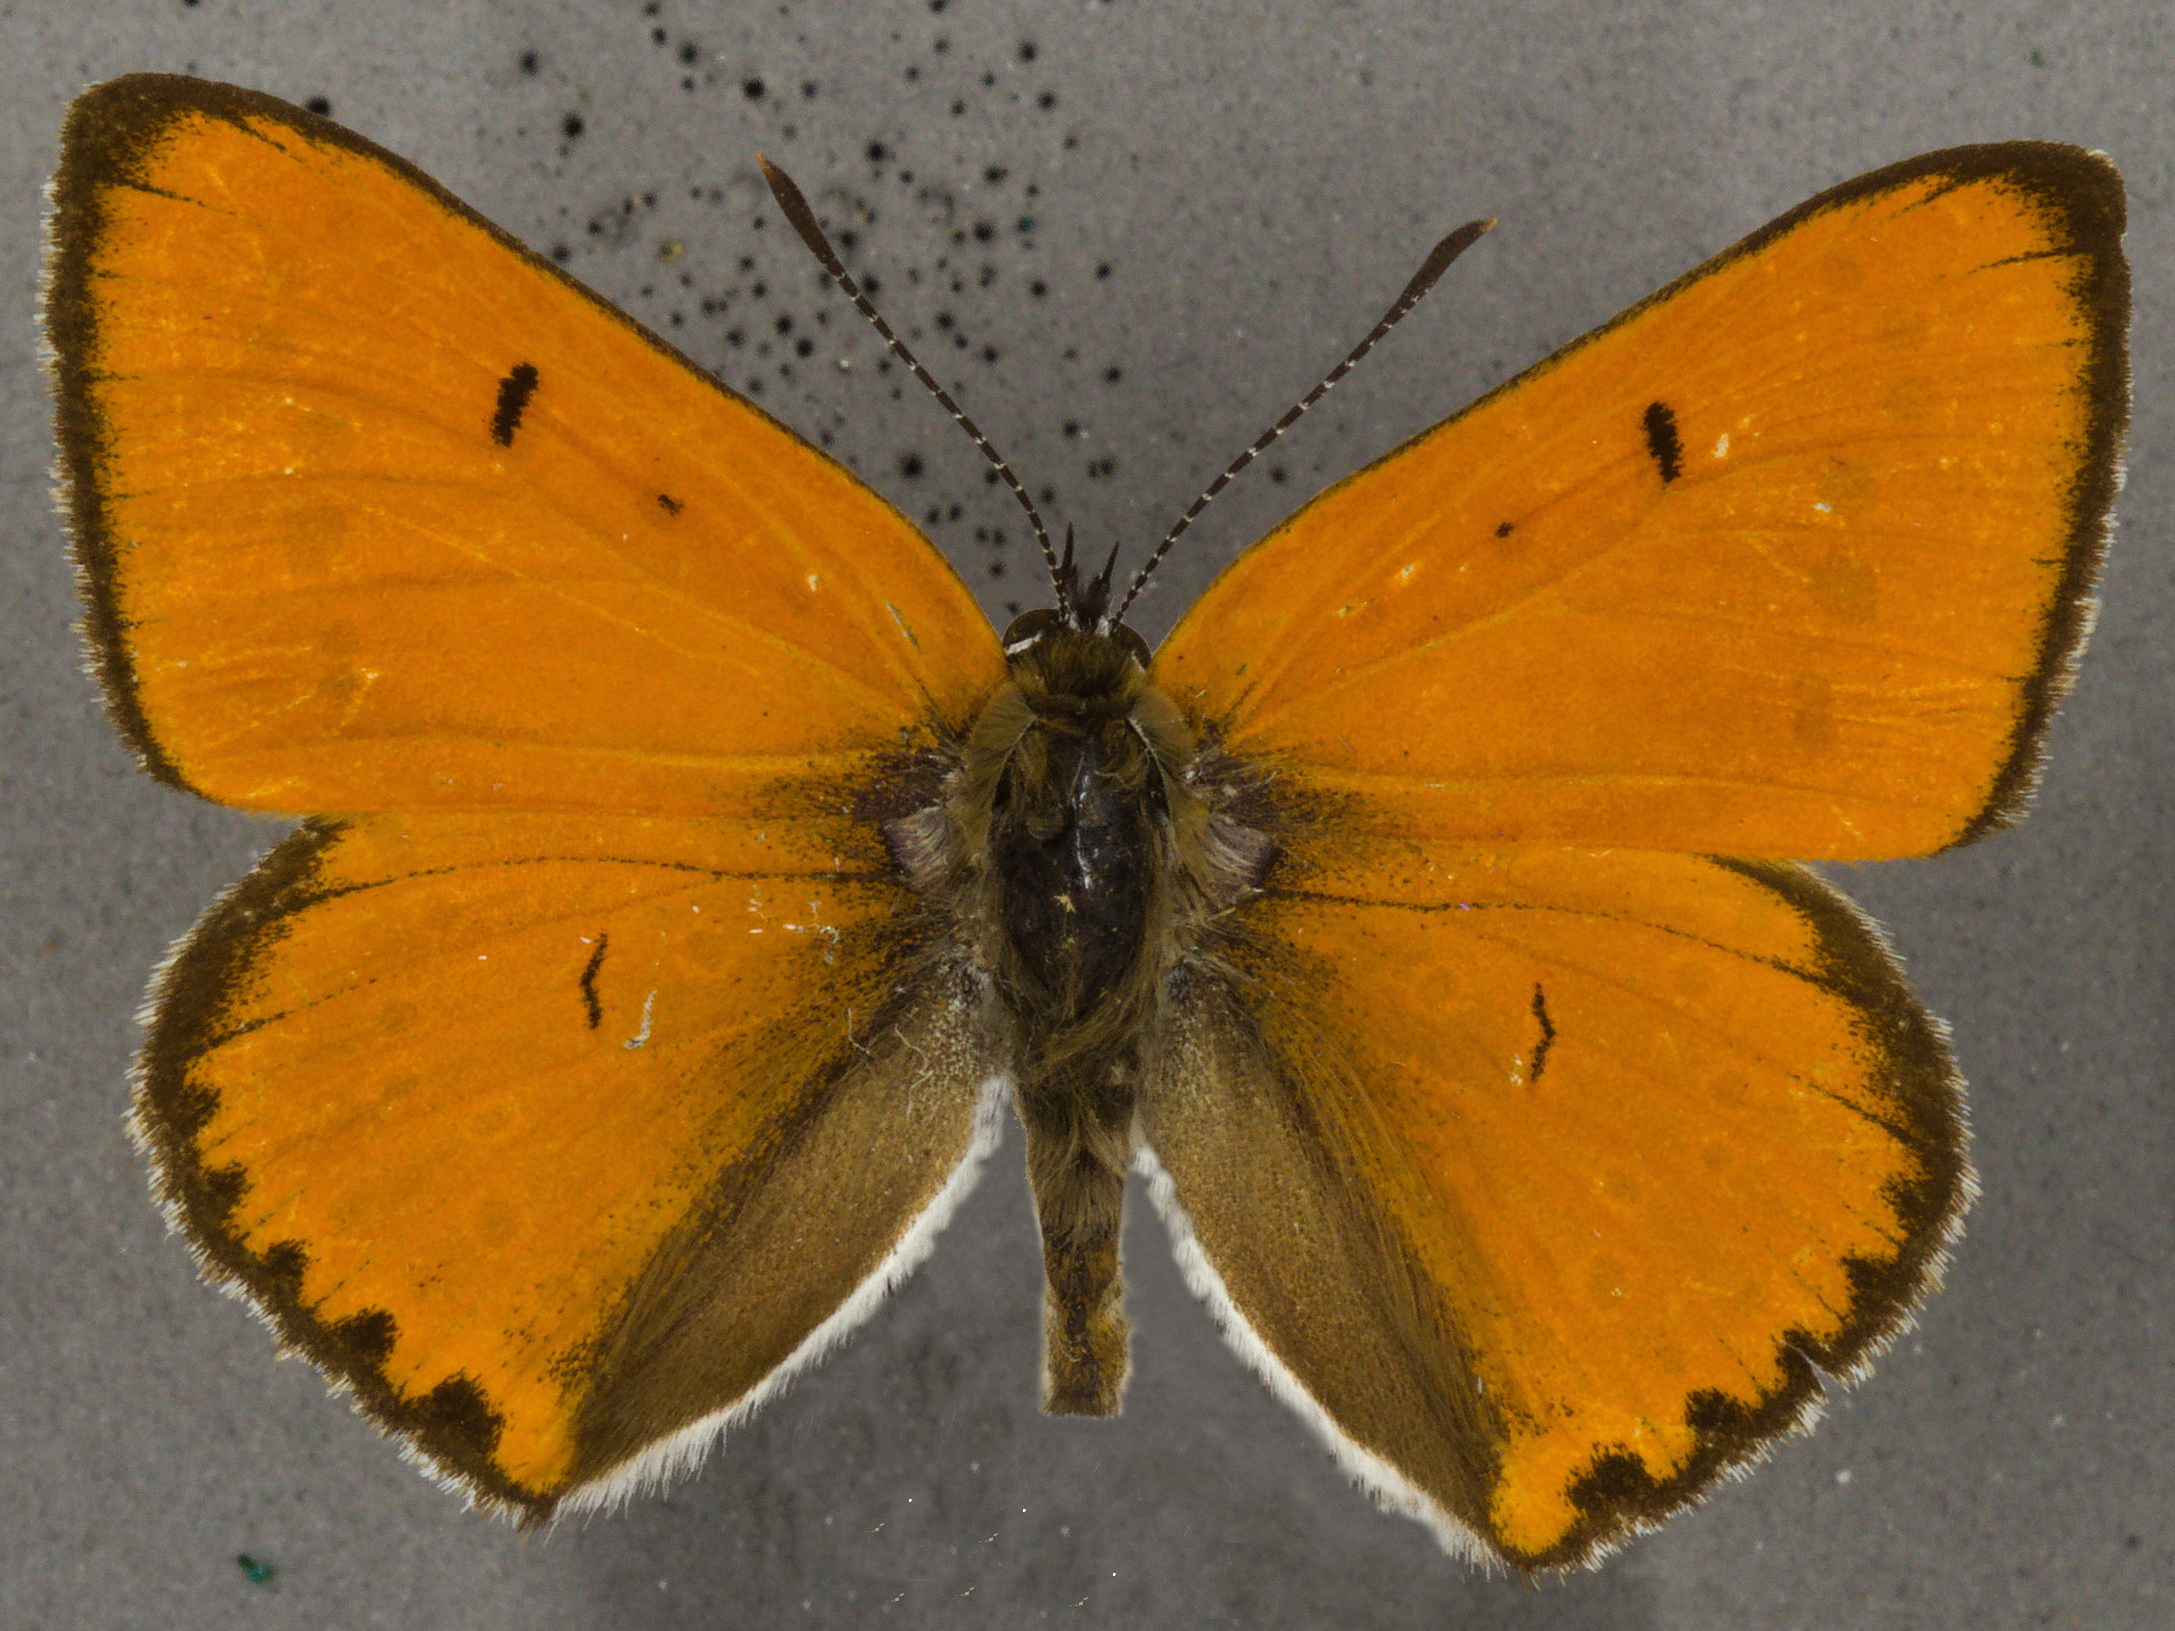 Large copper, male. University Museum of Zoology collection, copyright University of Cambridge